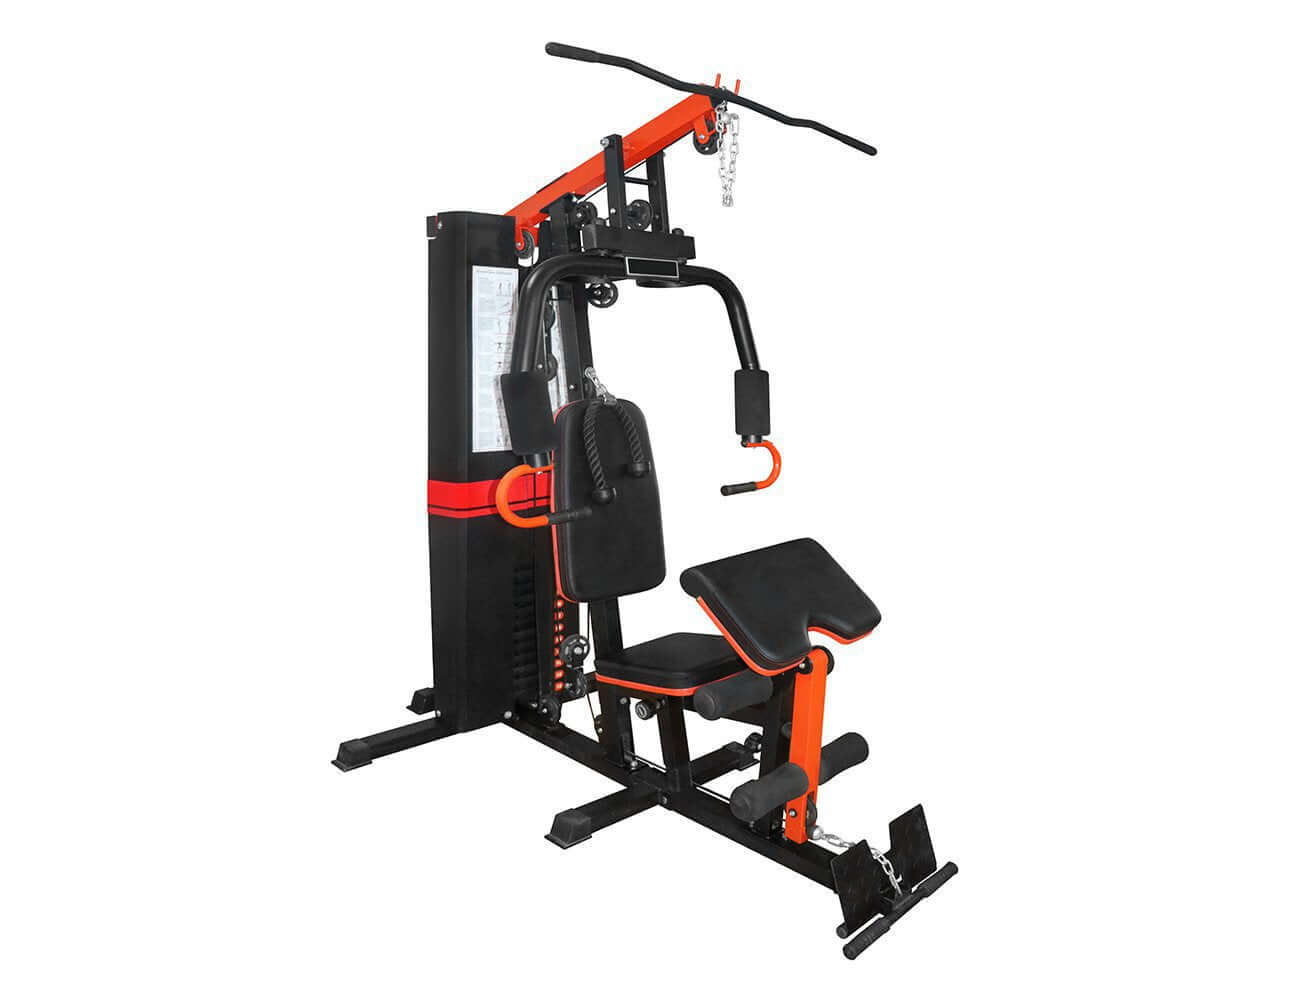 Home Gym Multifunctional Full Body Home Gym Equipment For, 60% OFF